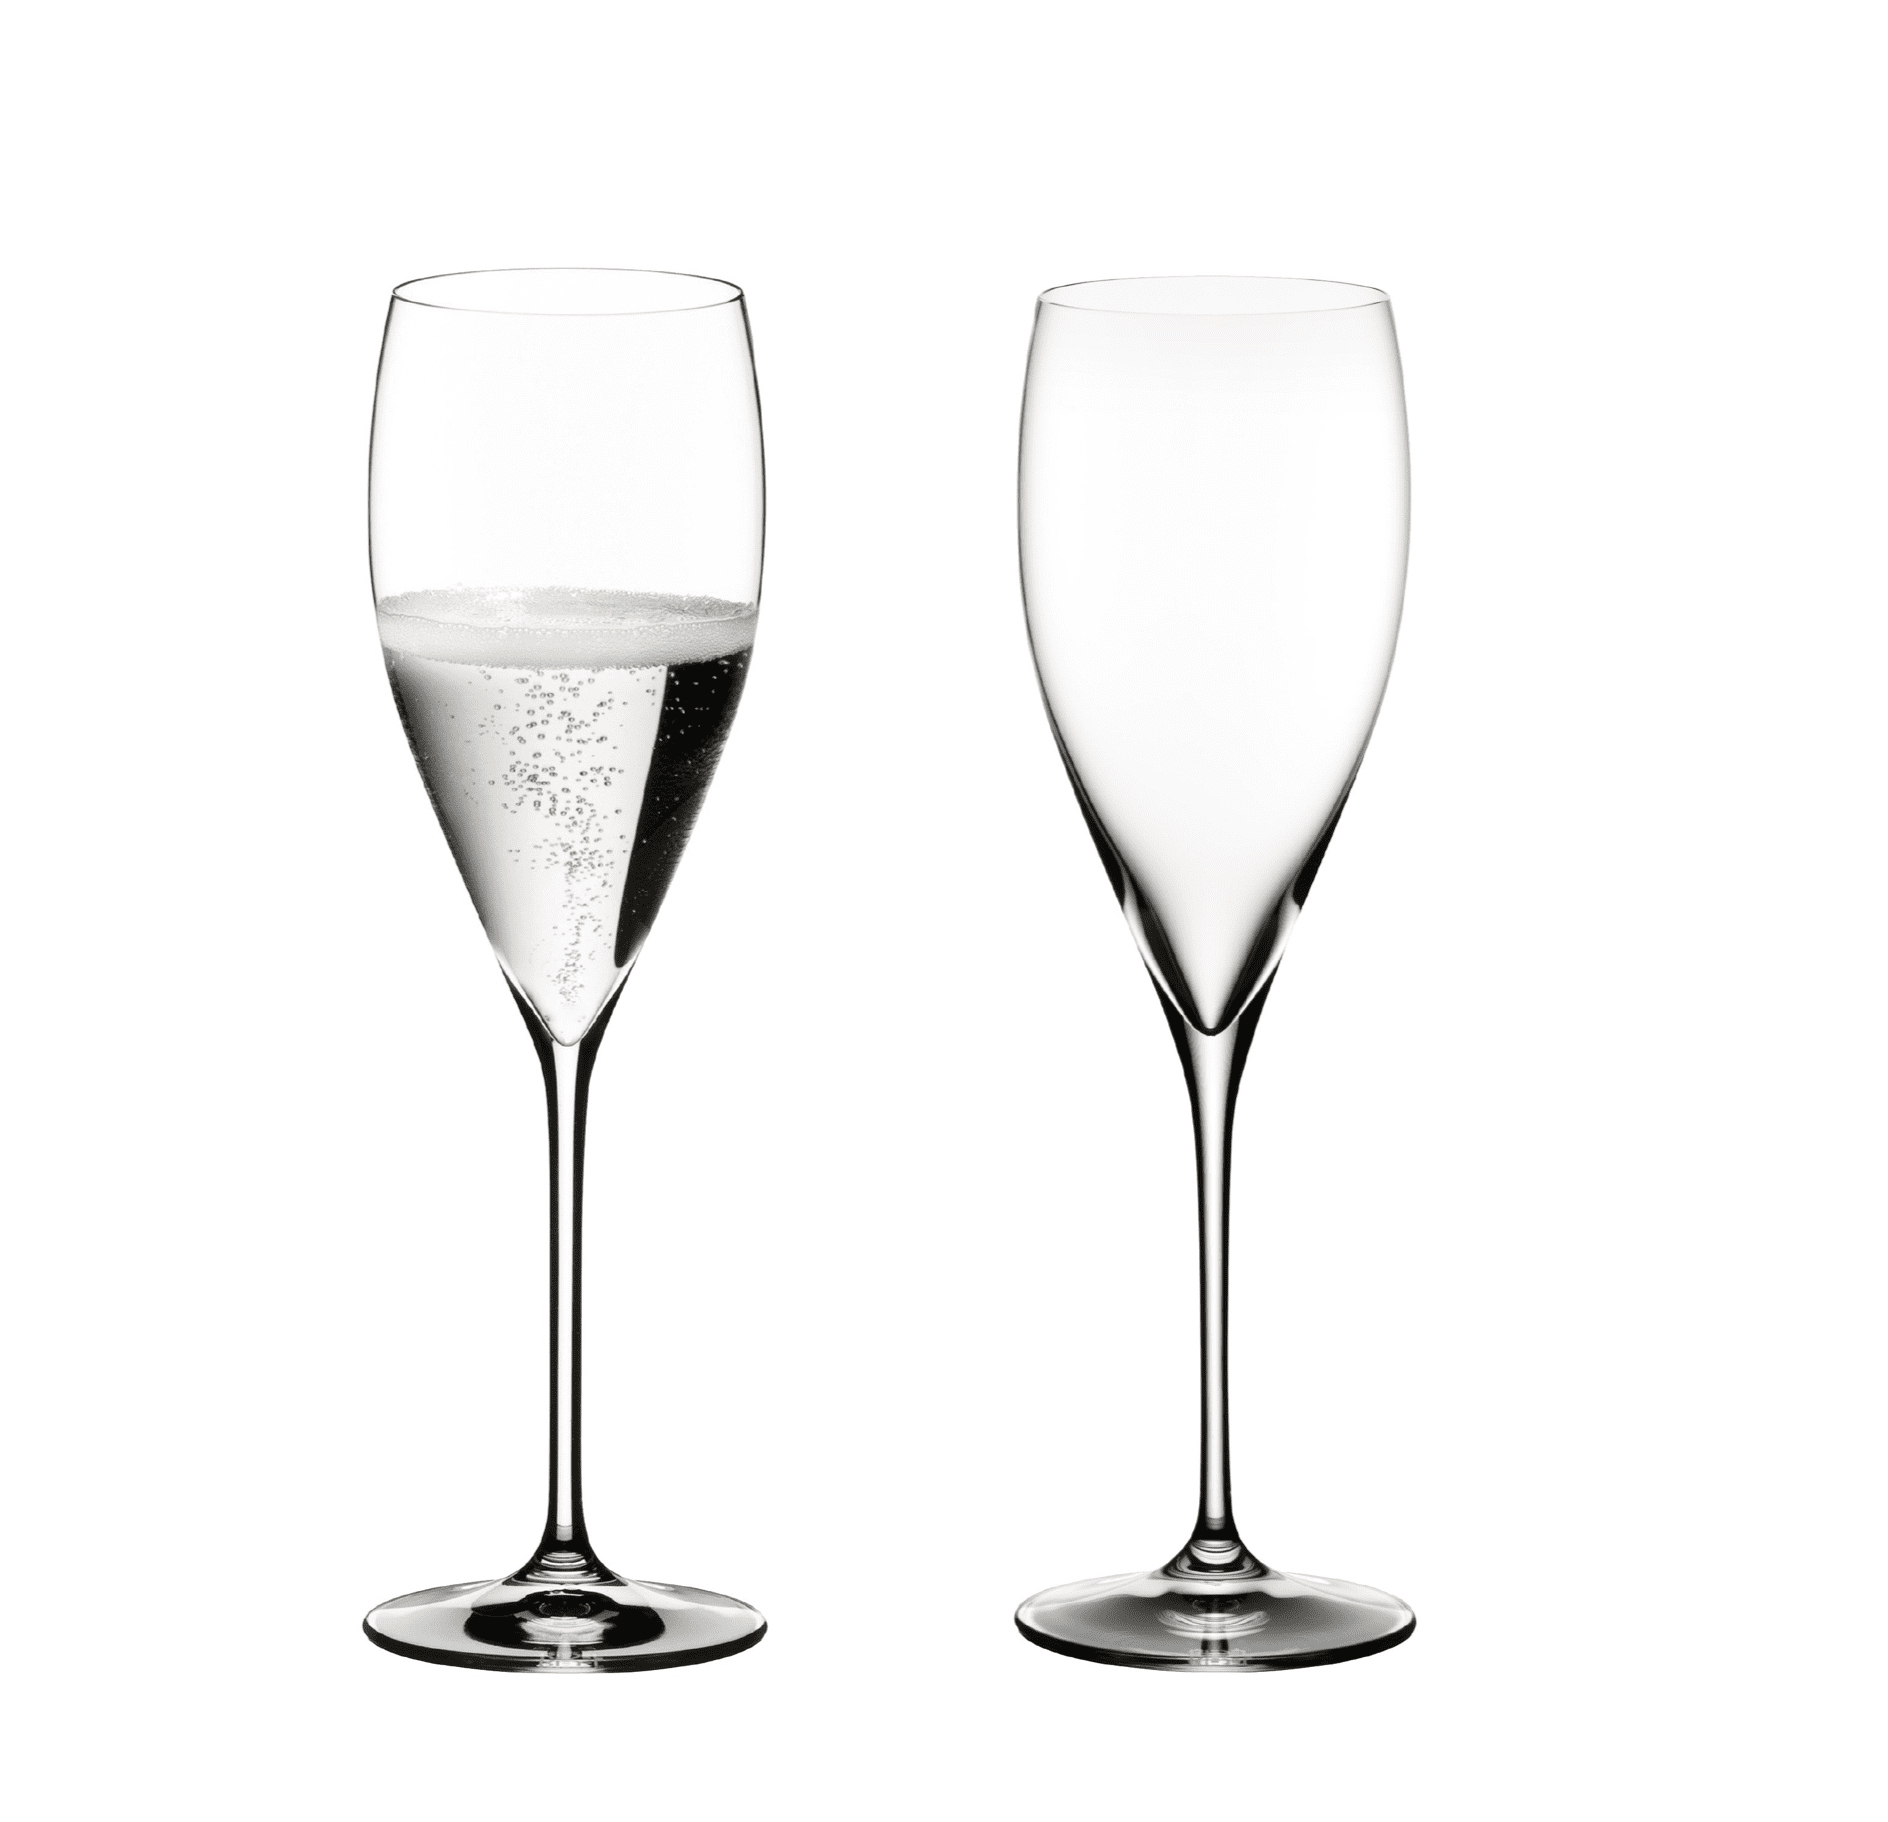 Riedel Ouverture Champagne 6408/48